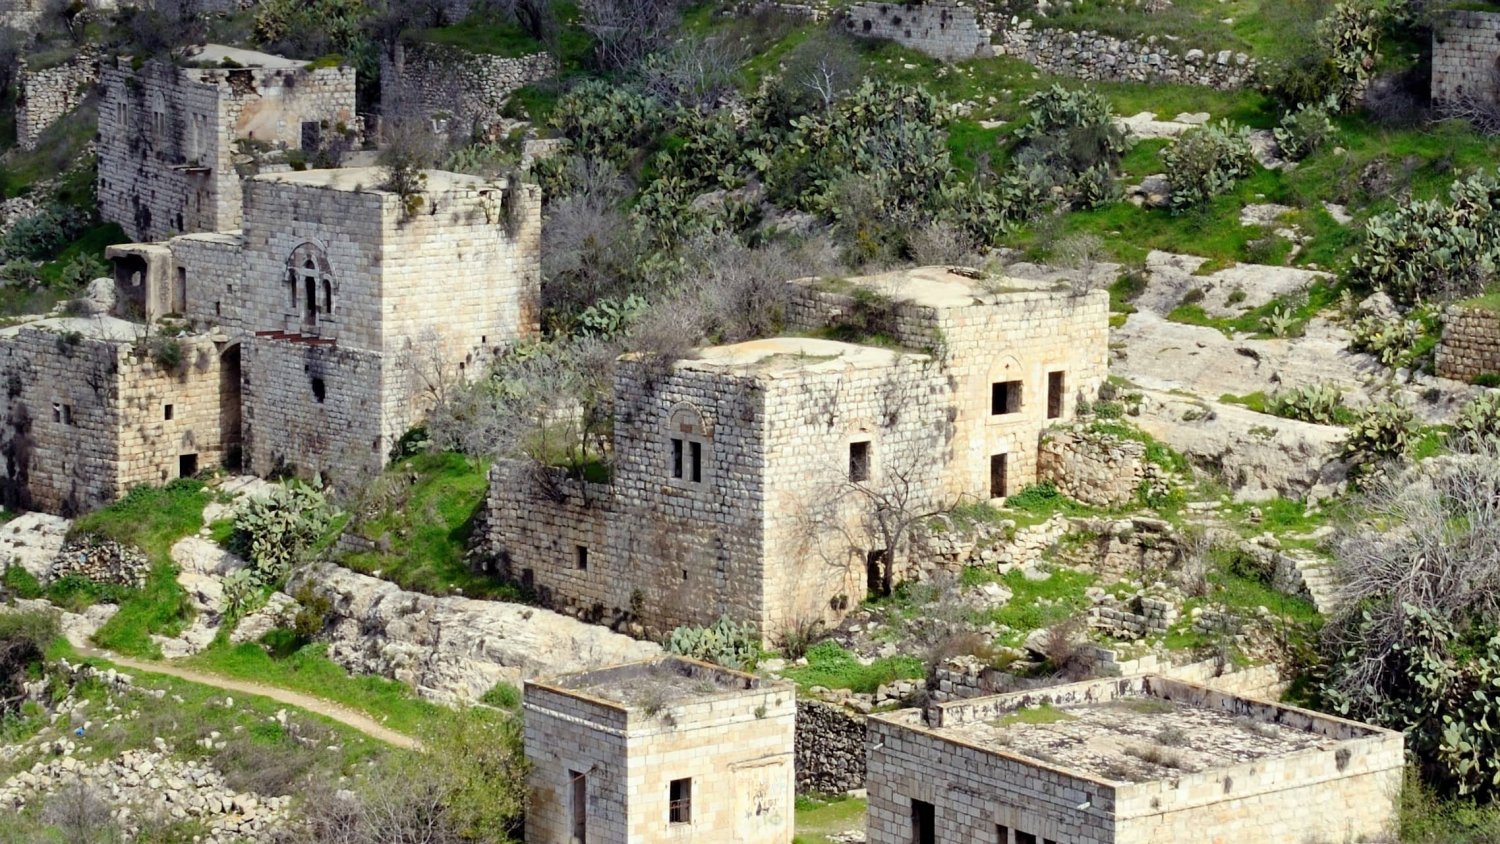 The houses of Lifta remain standing, unlike other Palestinian villages, preserving its archeology and culture